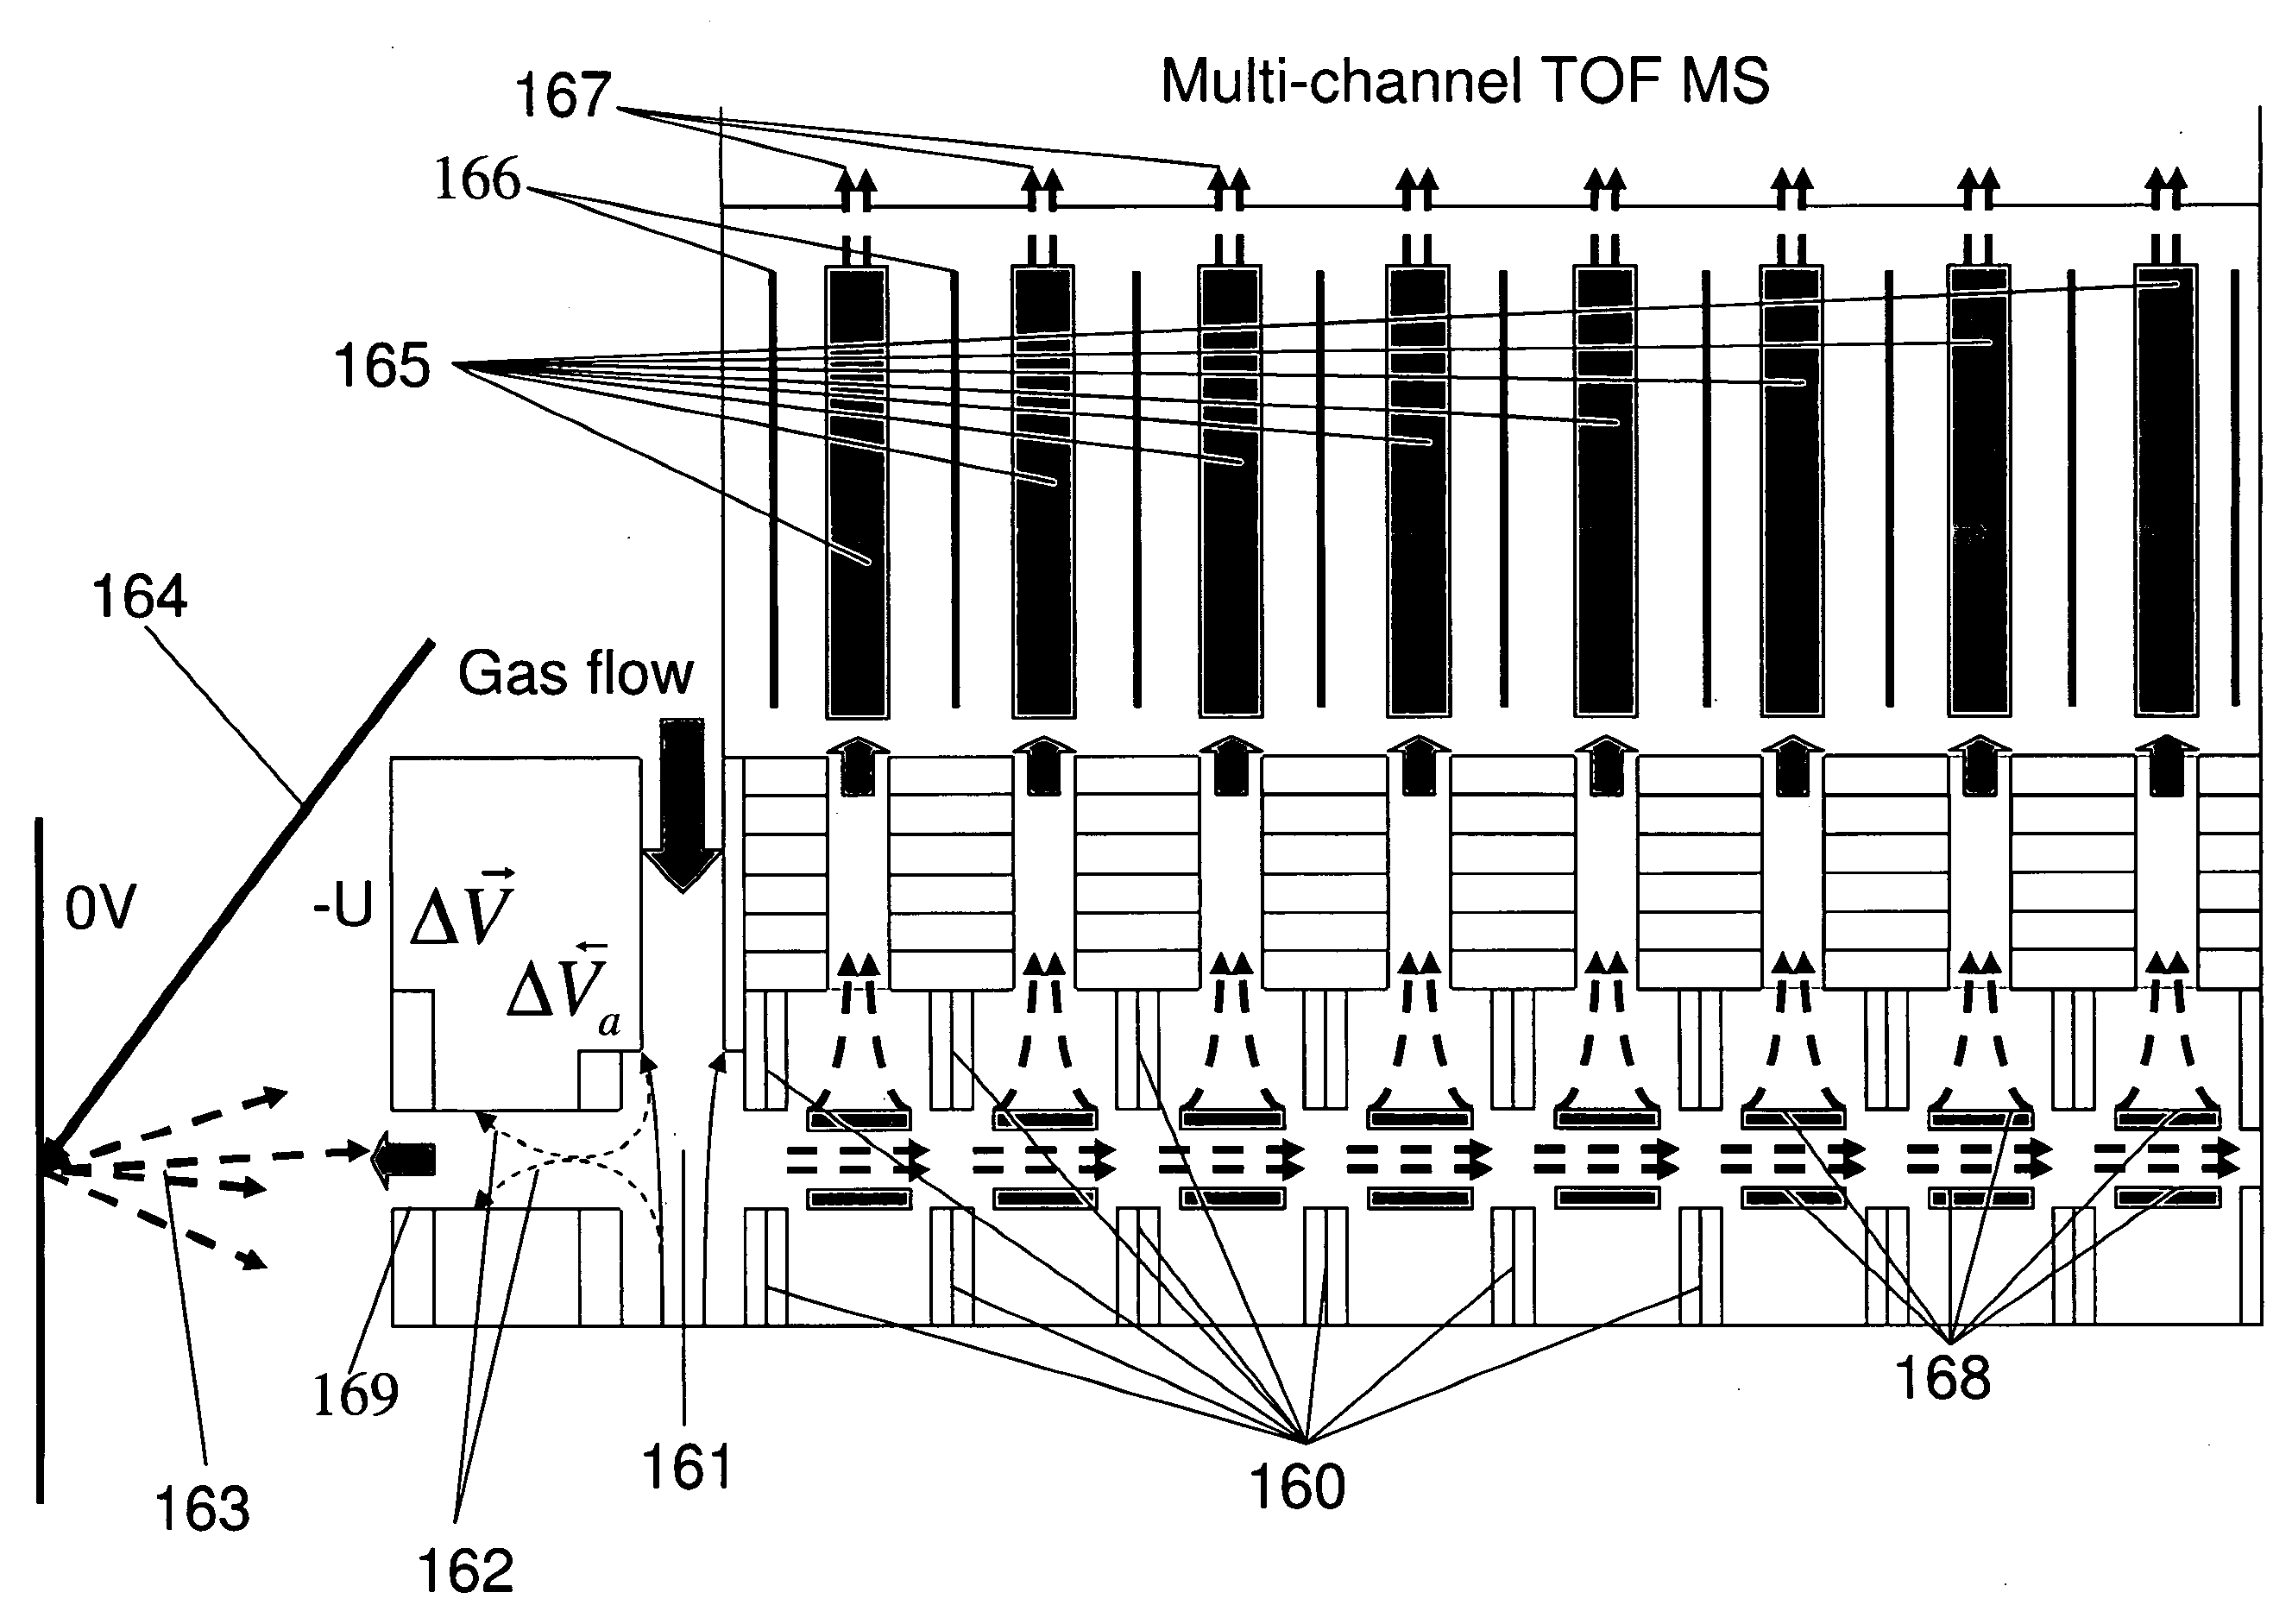 Multi-beam ion mobility time-of-flight mass spectrometry with multi-channel data recording